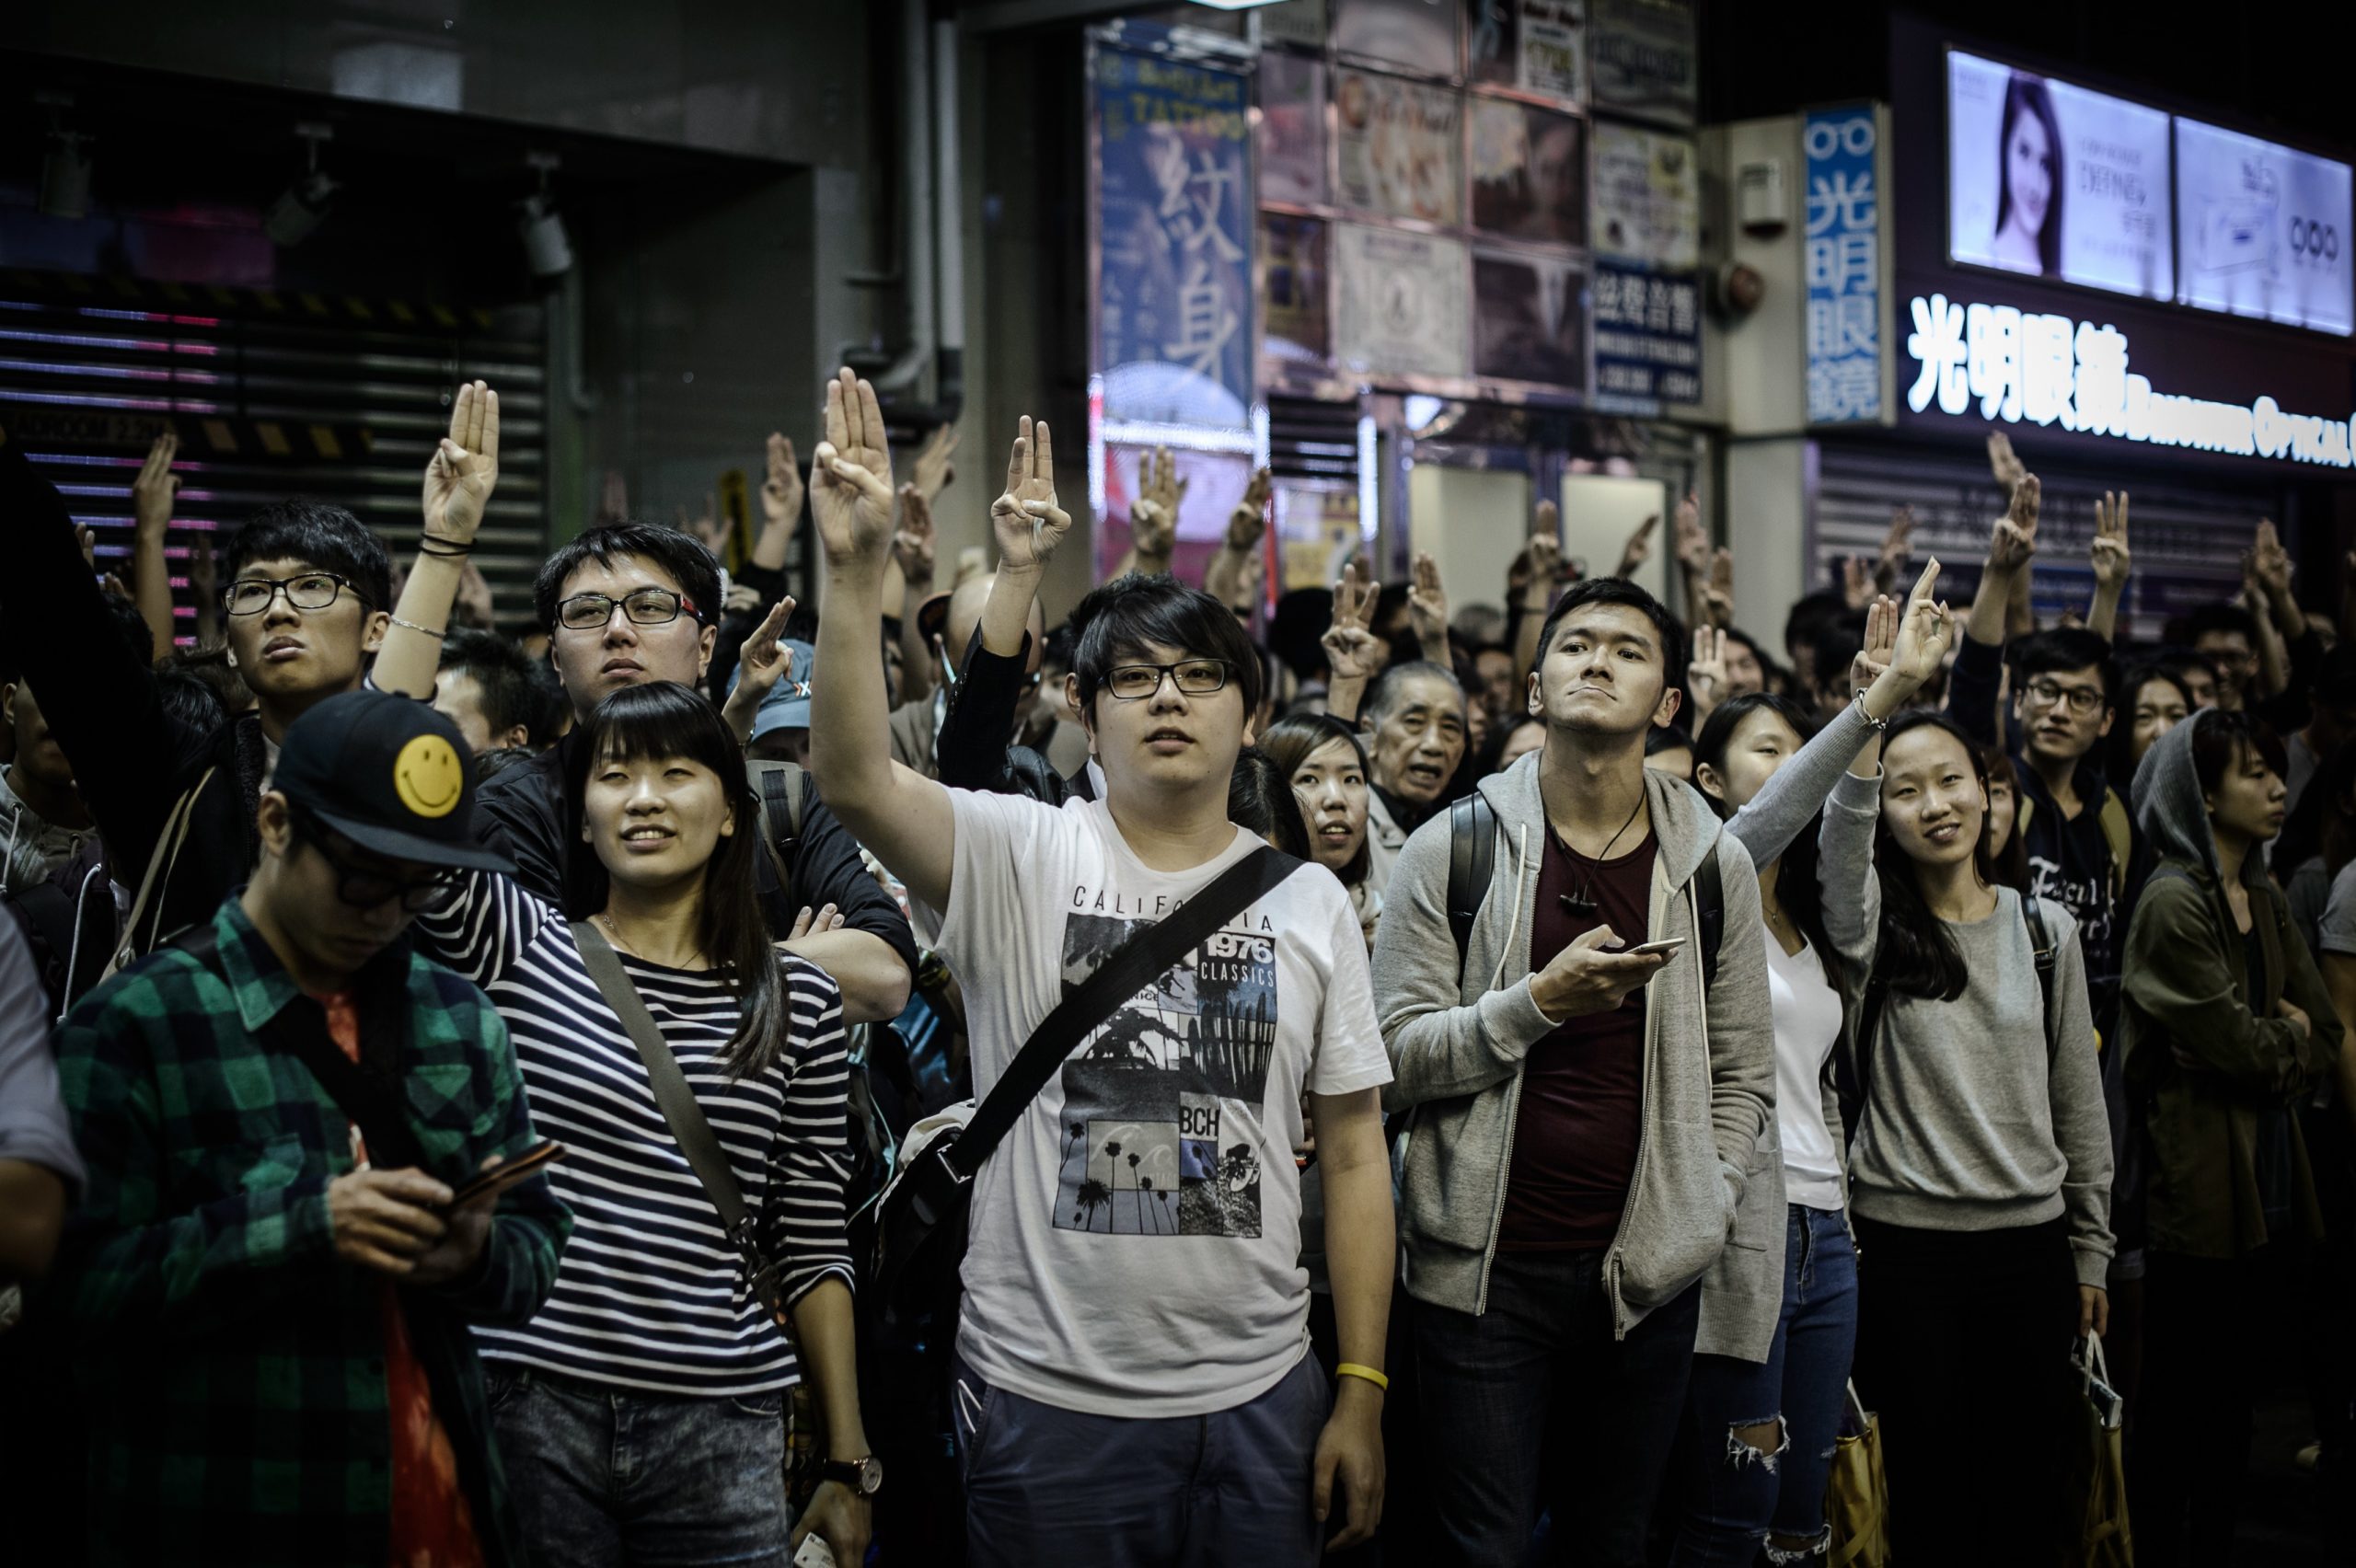 Supporters of the pro-democracy movement flash the three-finger salute from the The Hunger Games as a trailer of the movie is shown on the exterior screen of a theatre in the Mongkok district of Hong Kong on November 28, 2014. (Photo: Philippe Lopez, Getty Images)